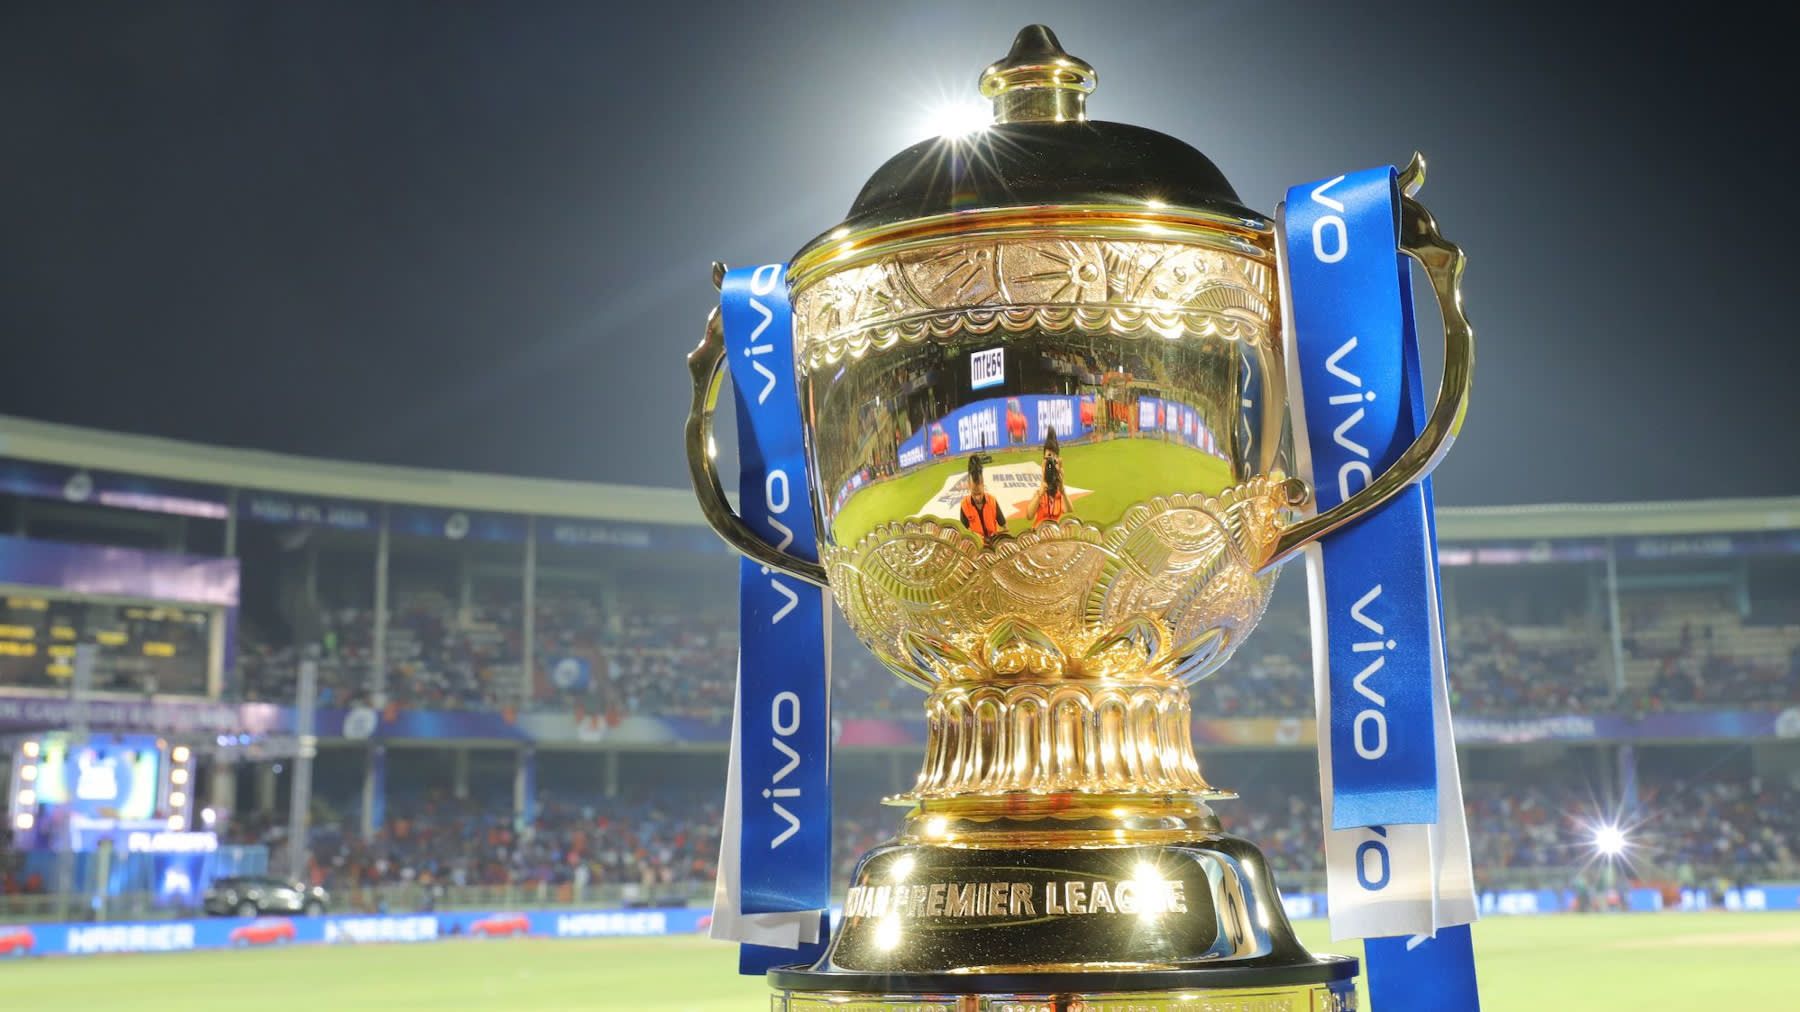 Chinese sponsor's exit opens up IPL cricket deal for India unicorn Asian Review